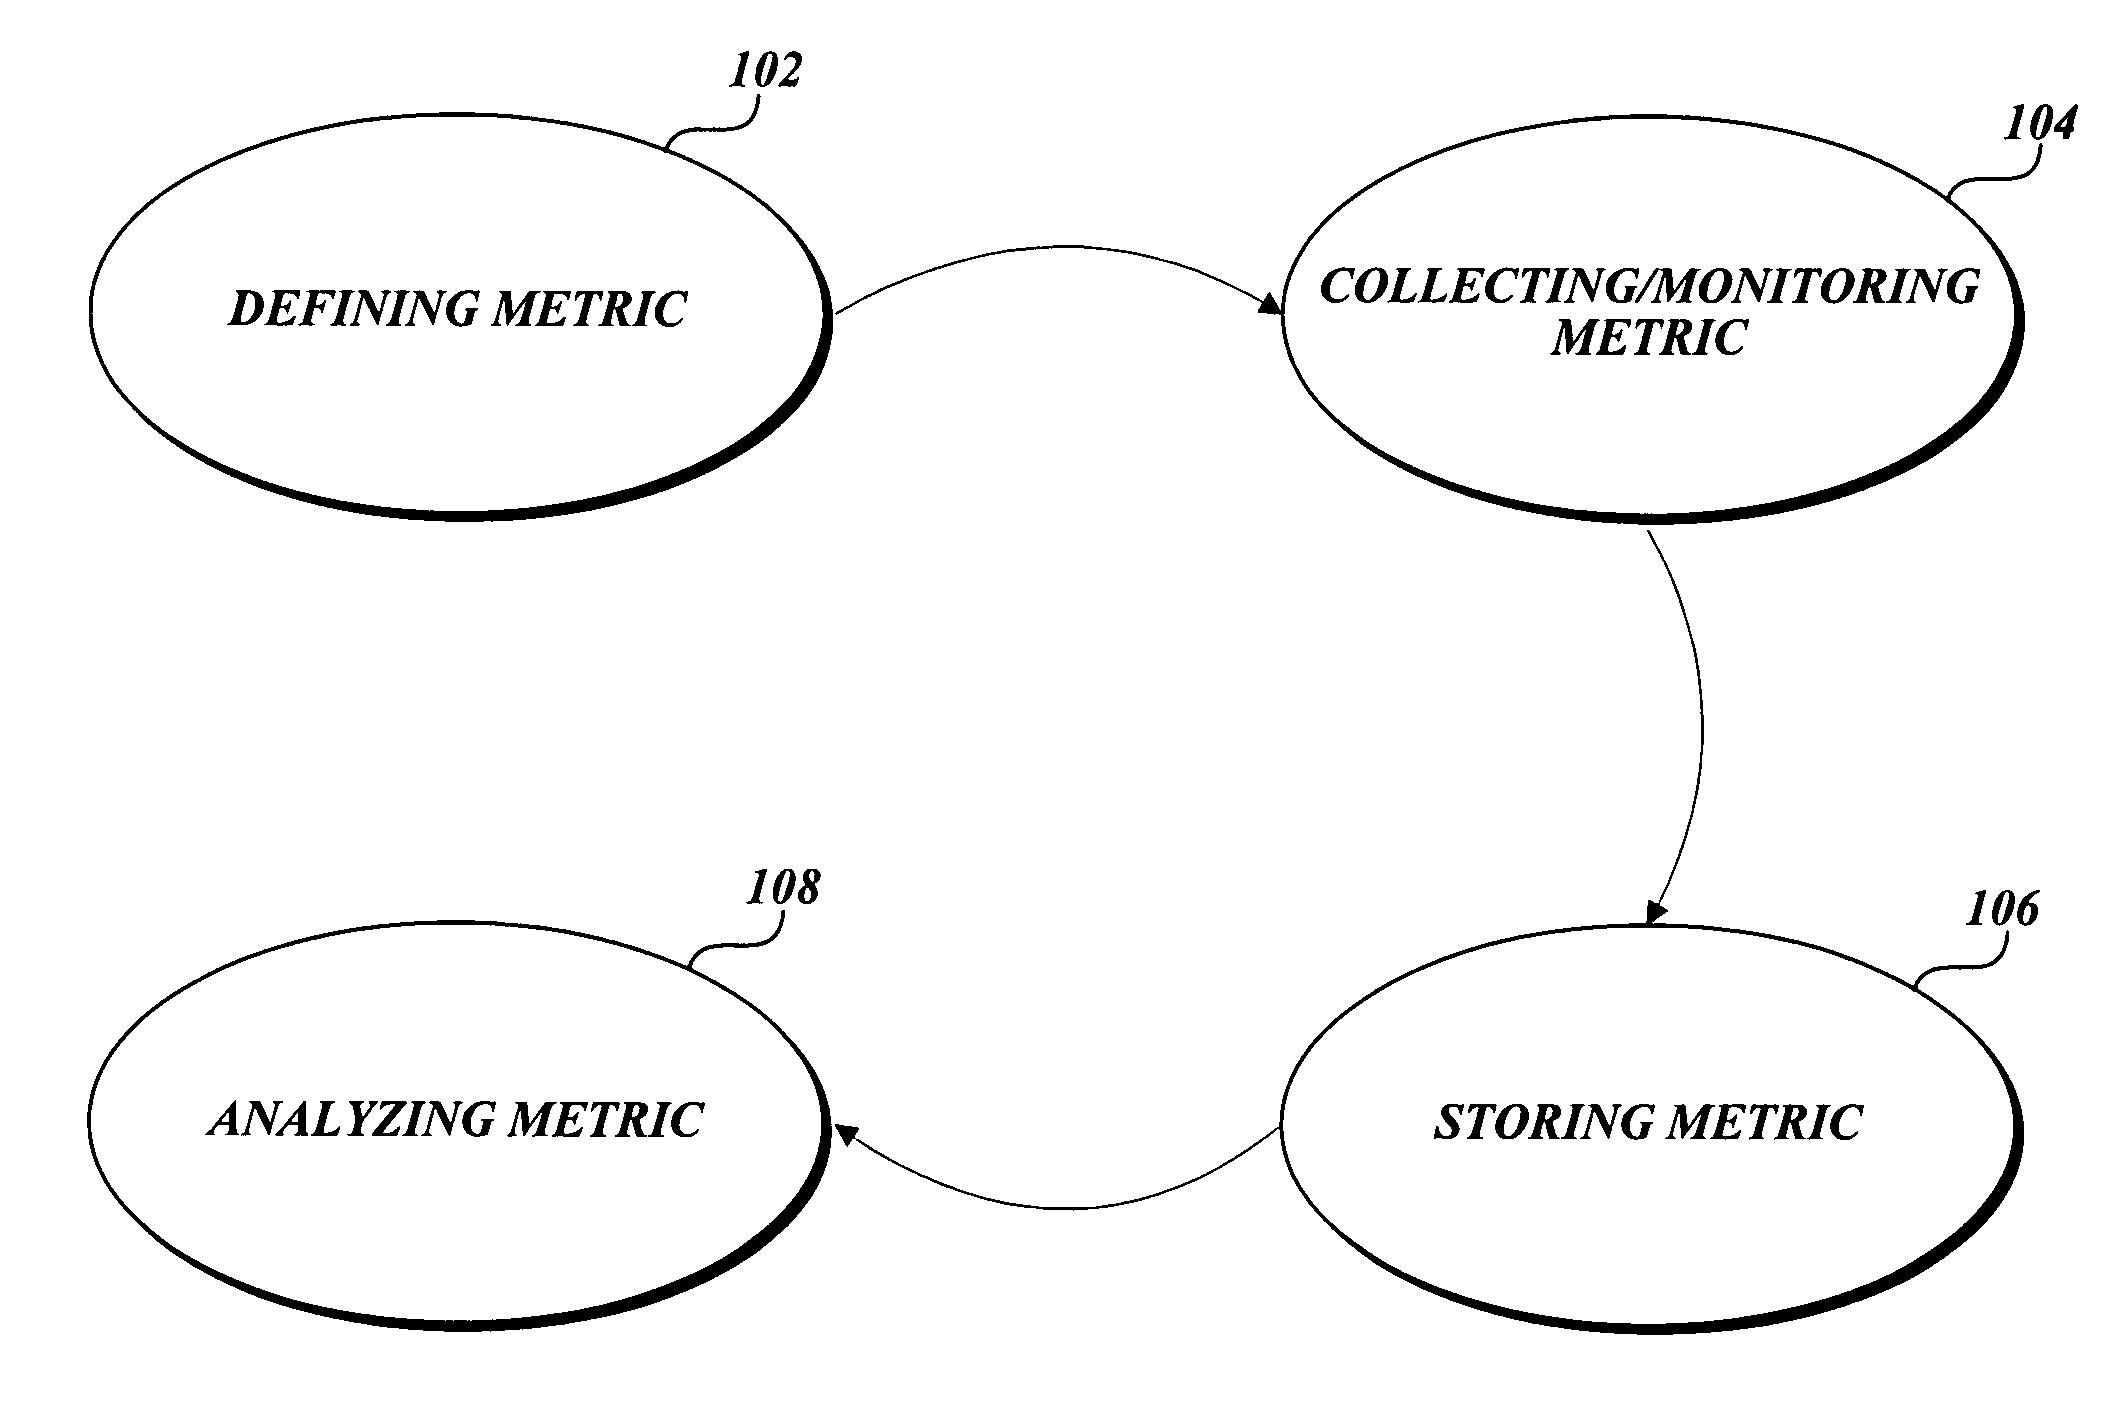 Framework for collecting, storing, and analyzing system metrics